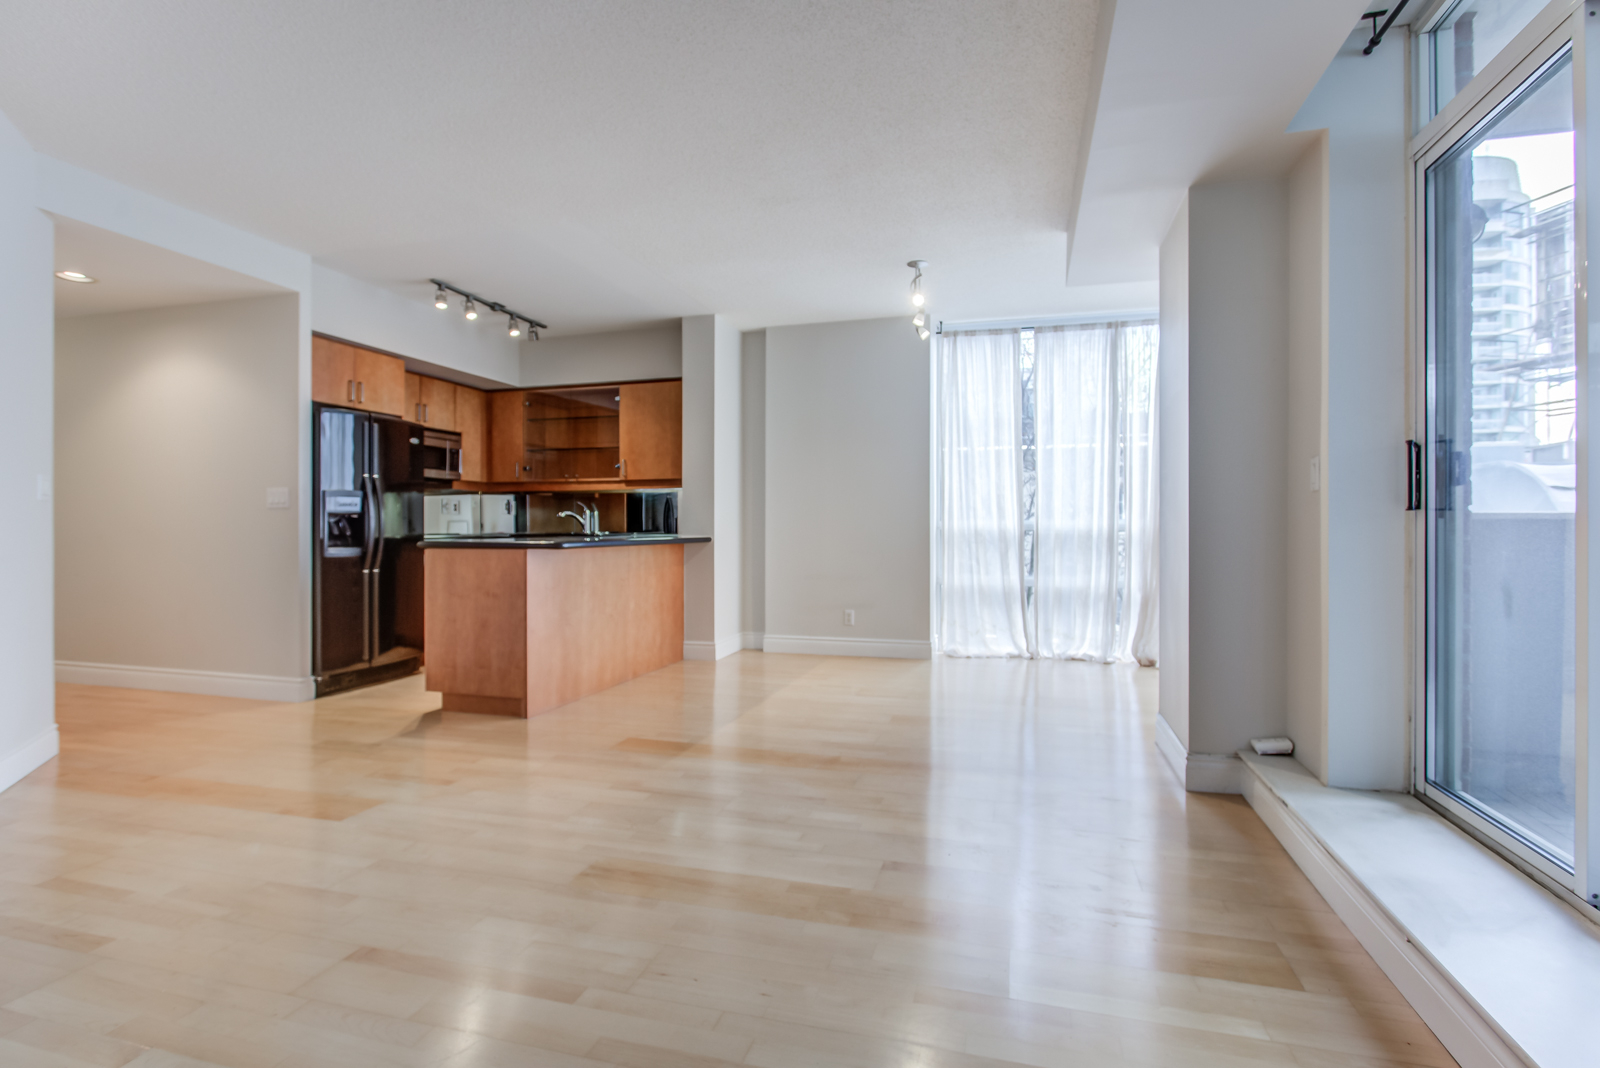 Empty living, dining & kitchen area of 20 Collier St Unit 408 with shiny hardwood floors.